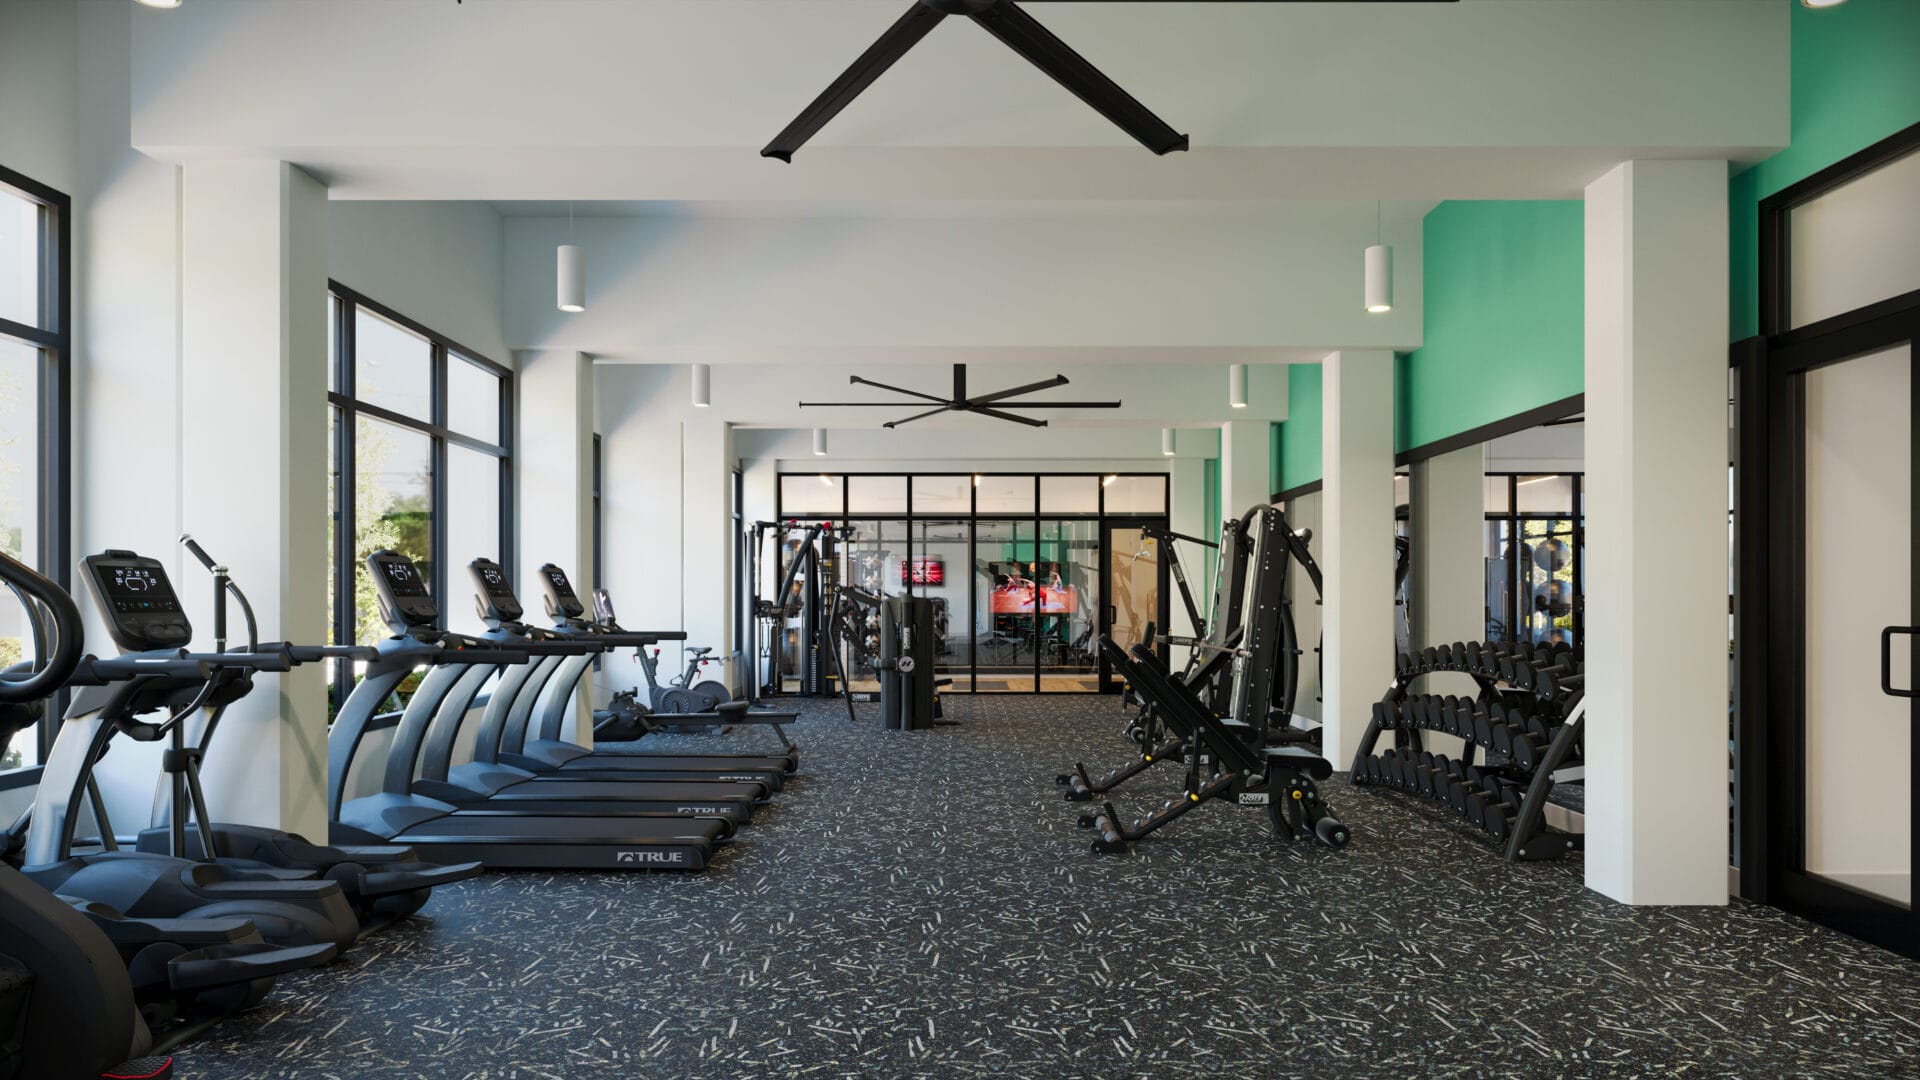 A gym with many different machines and a ceiling fan.